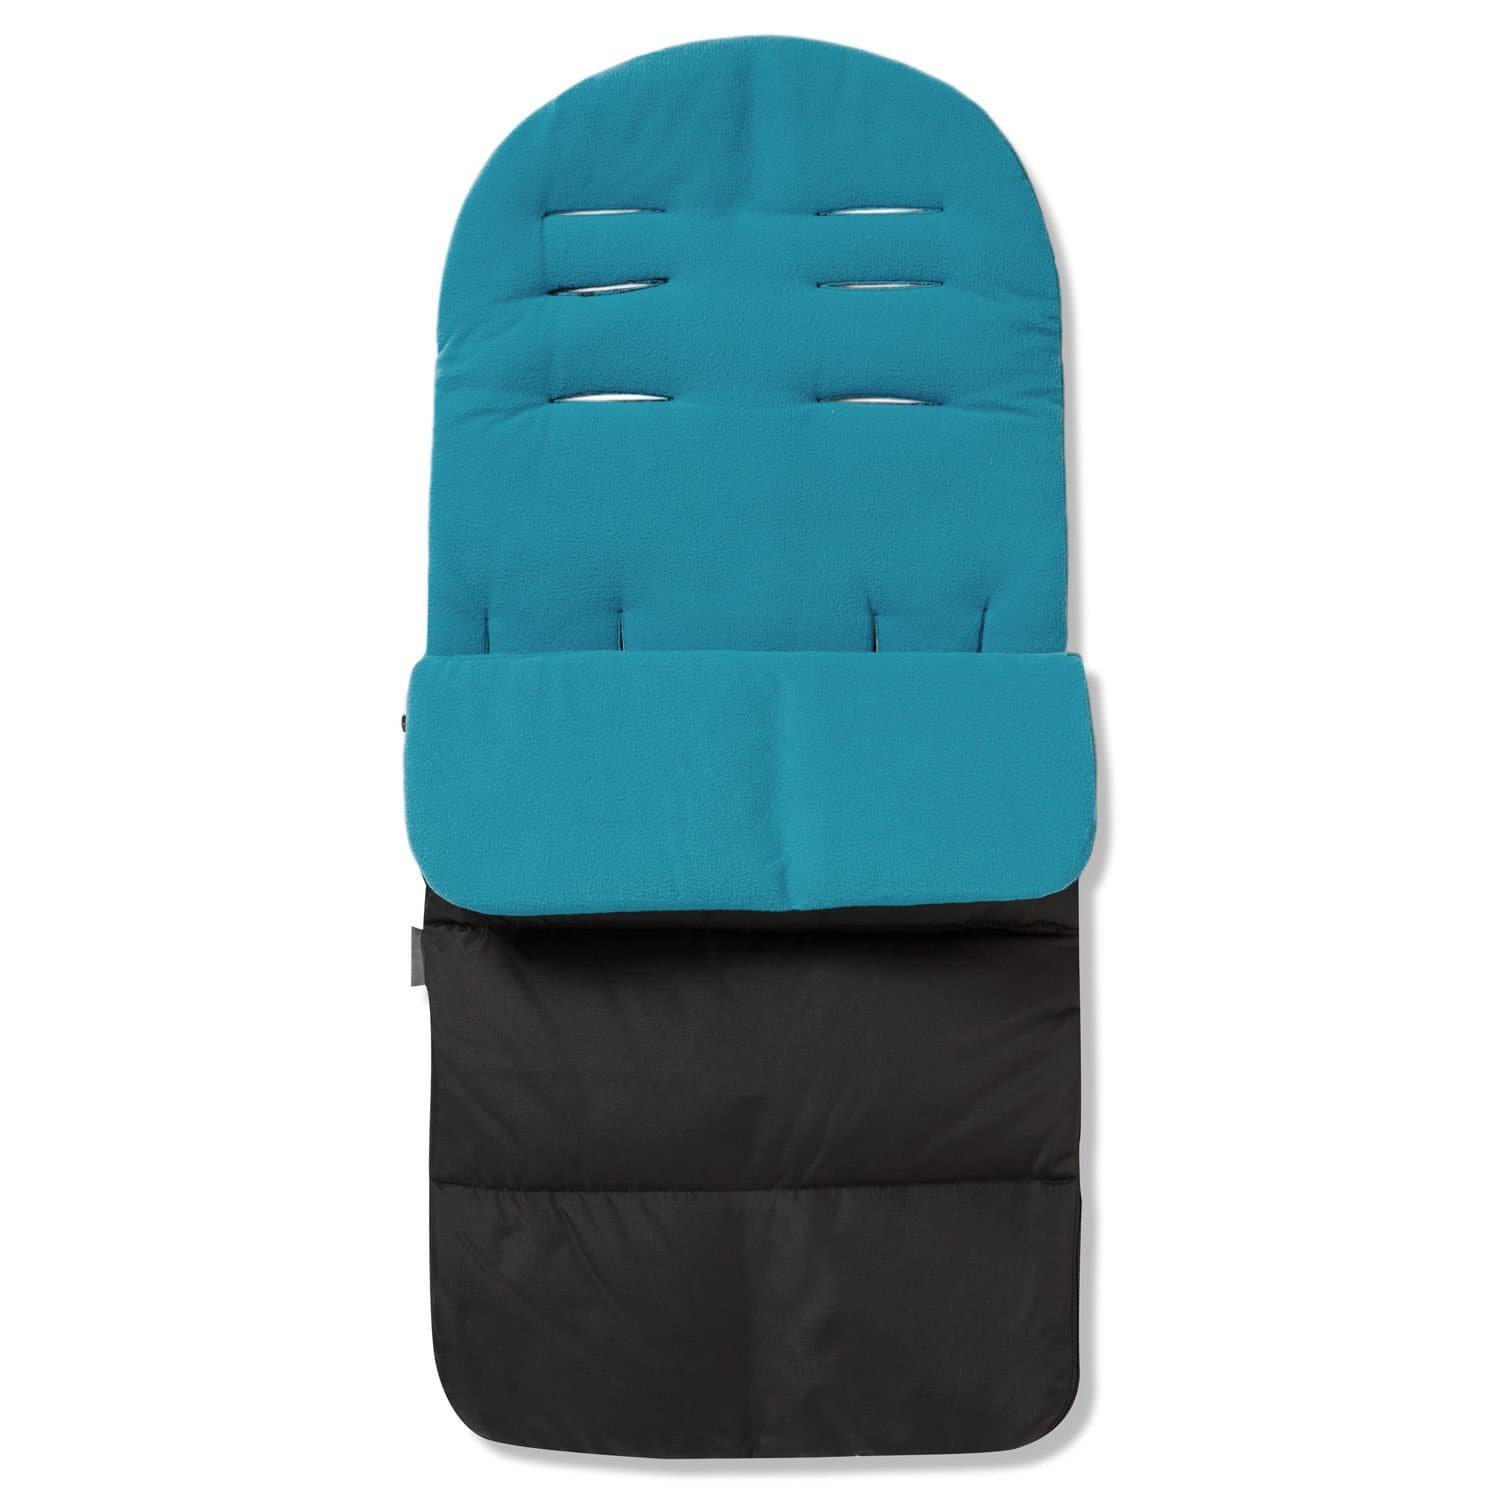 Premium Footmuff / Cosy Toes Compatible with Valco - Ocean Blue / Fits All Models | For Your Little One